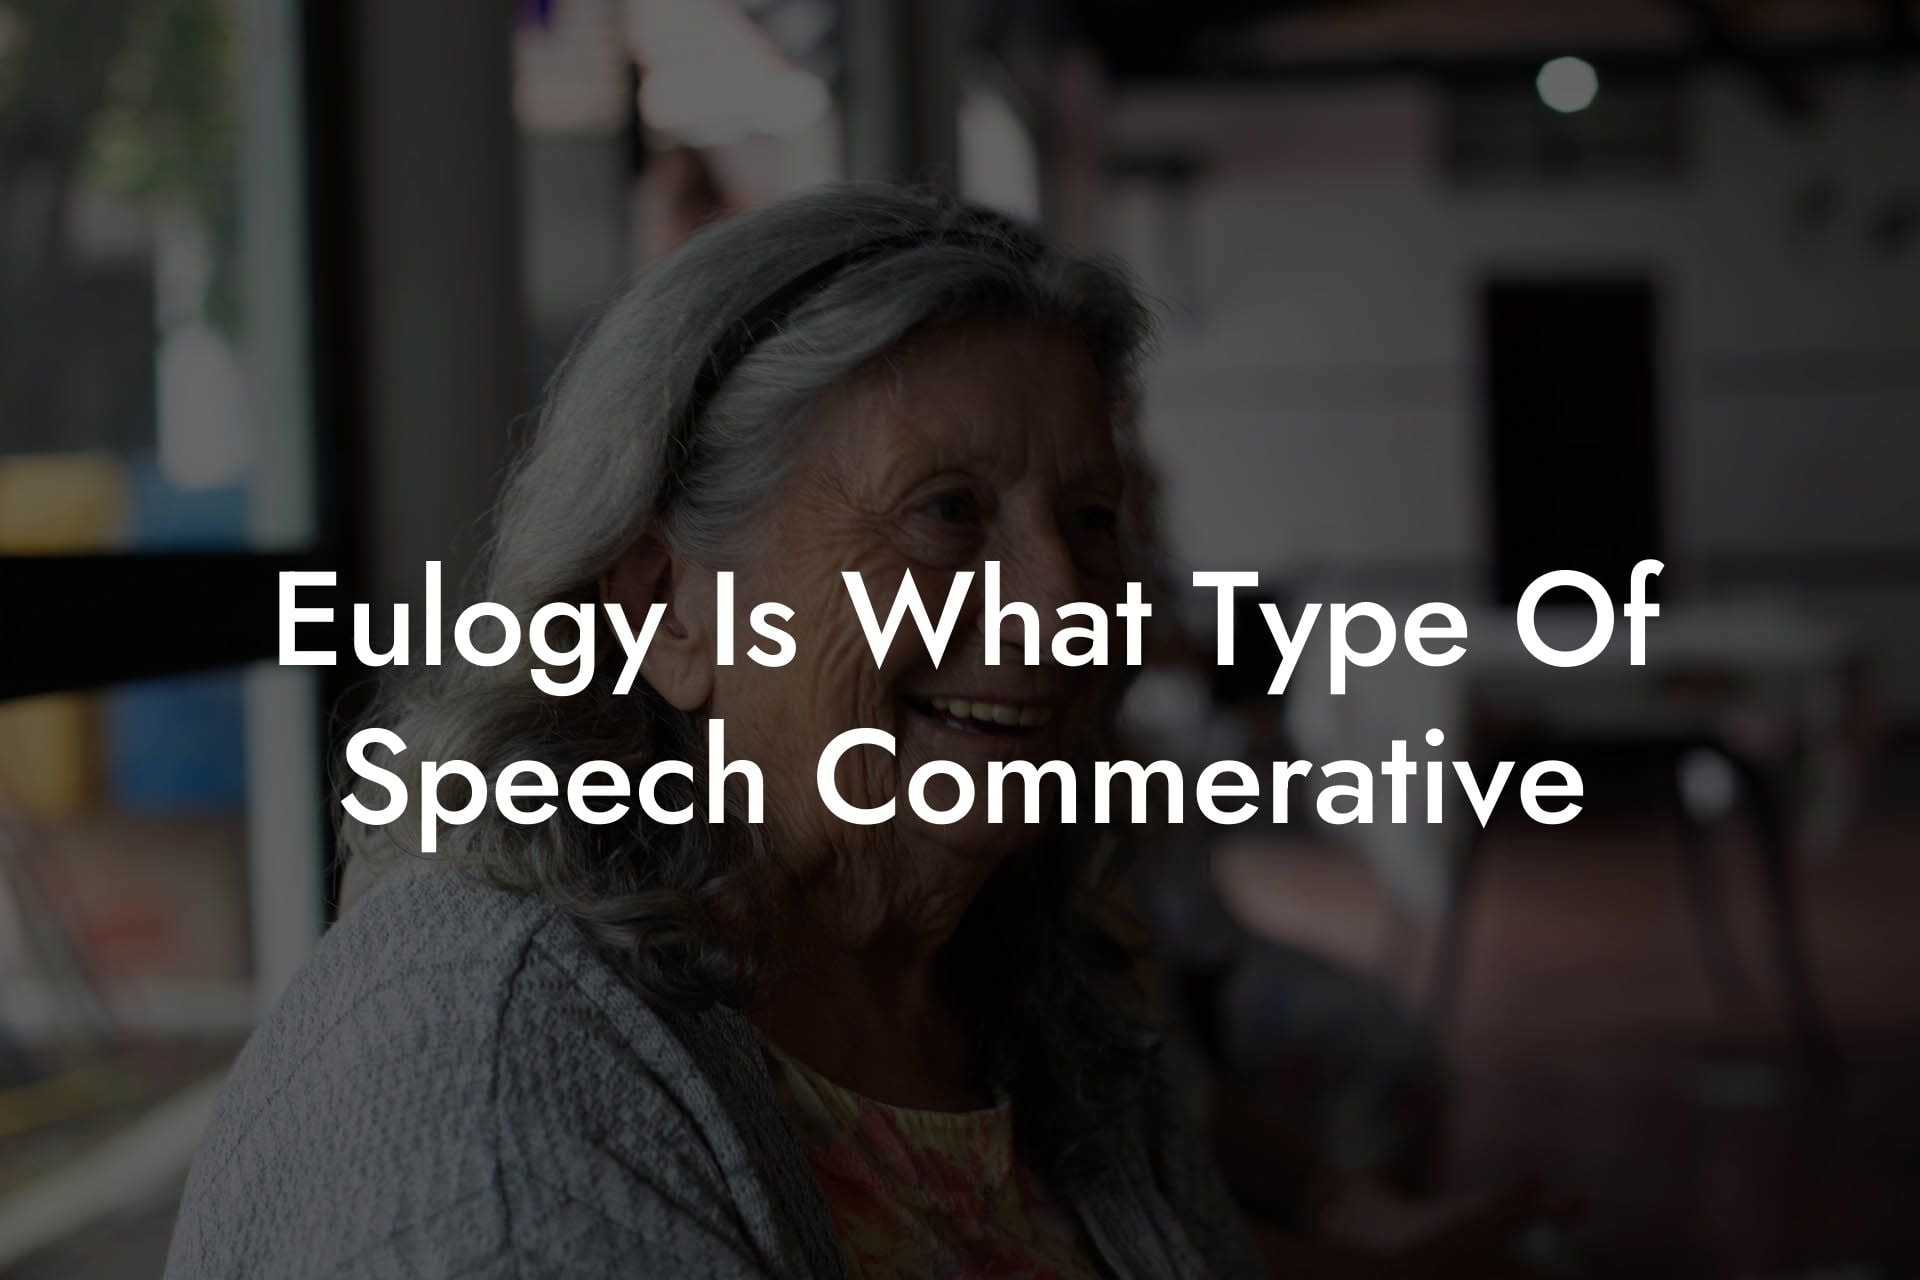 Eulogy Is What Type Of Speech Commerative